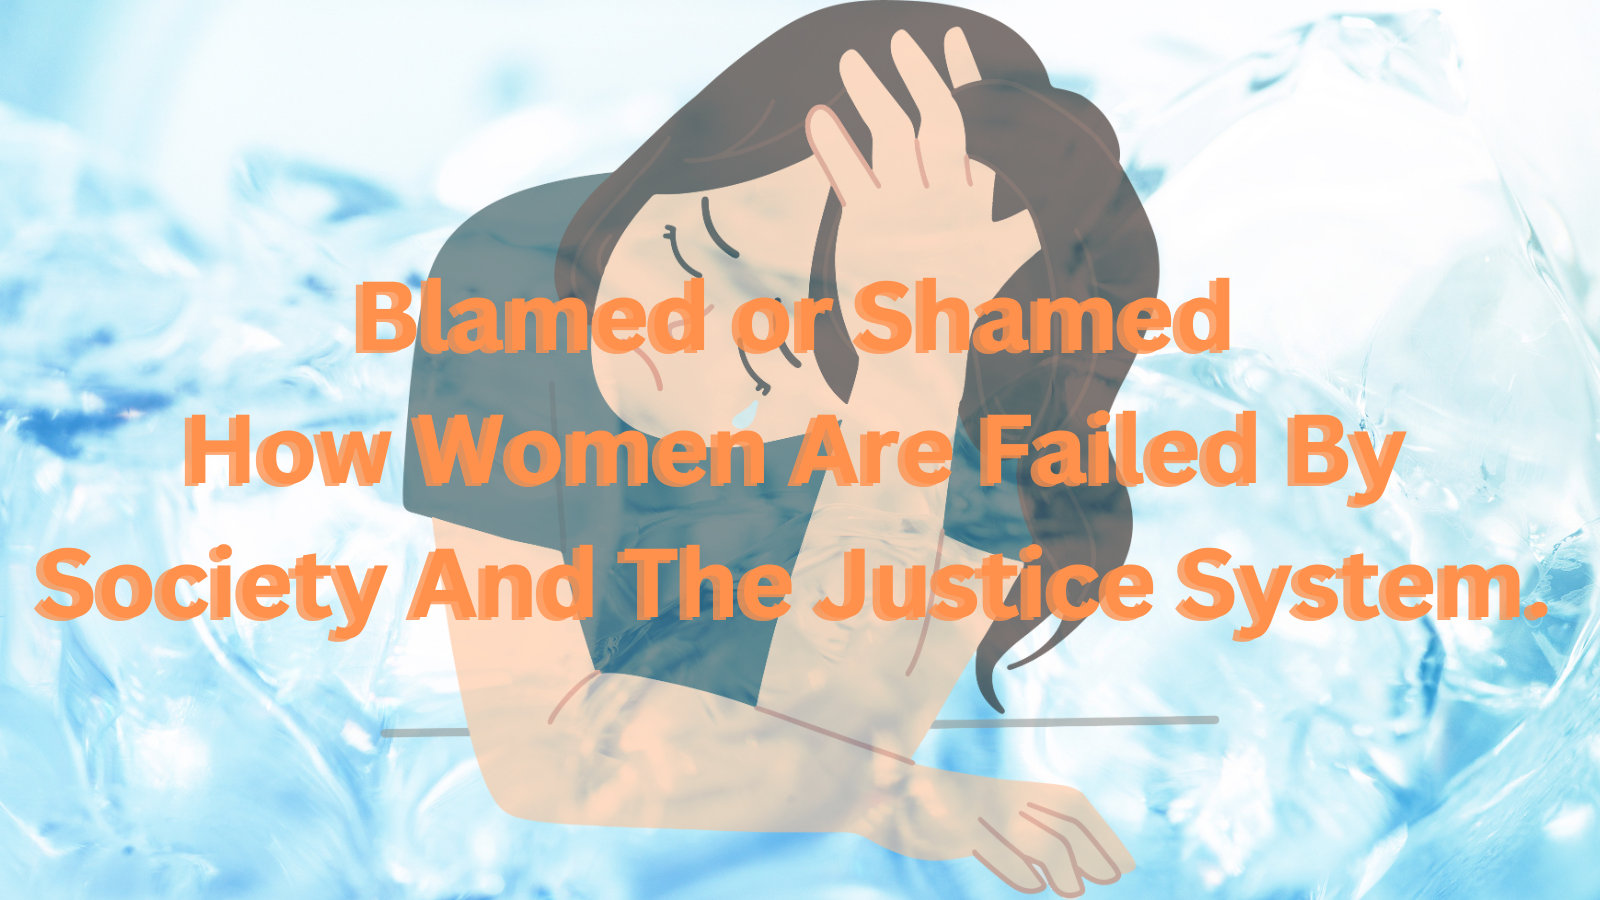 Blamed or Shamed How Women Are Failed By Society And The Justice System.